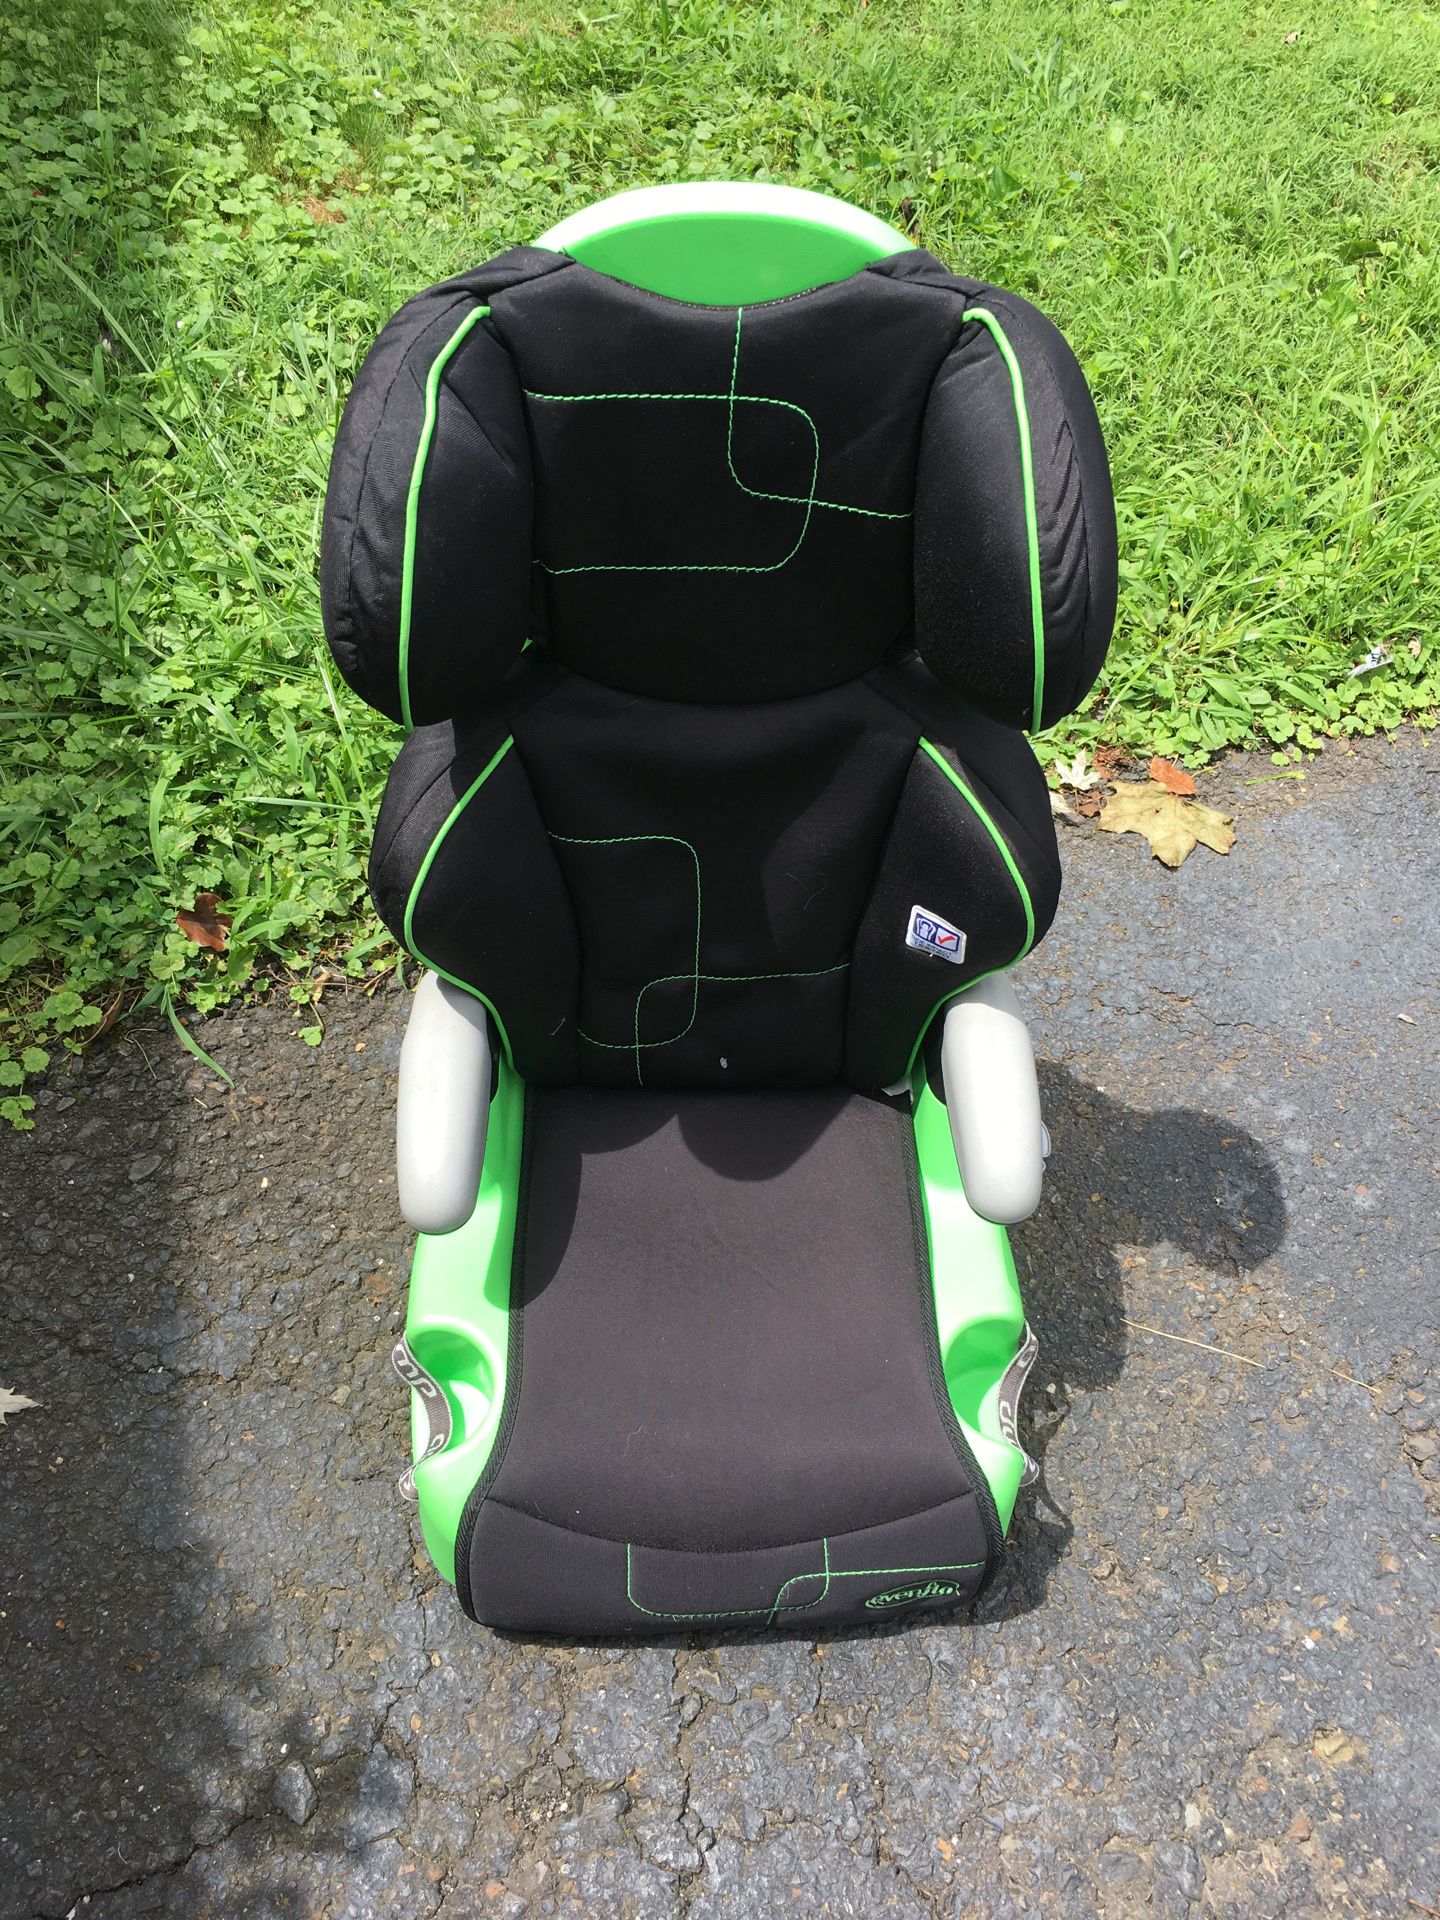 2 in 1 Child booster car seat